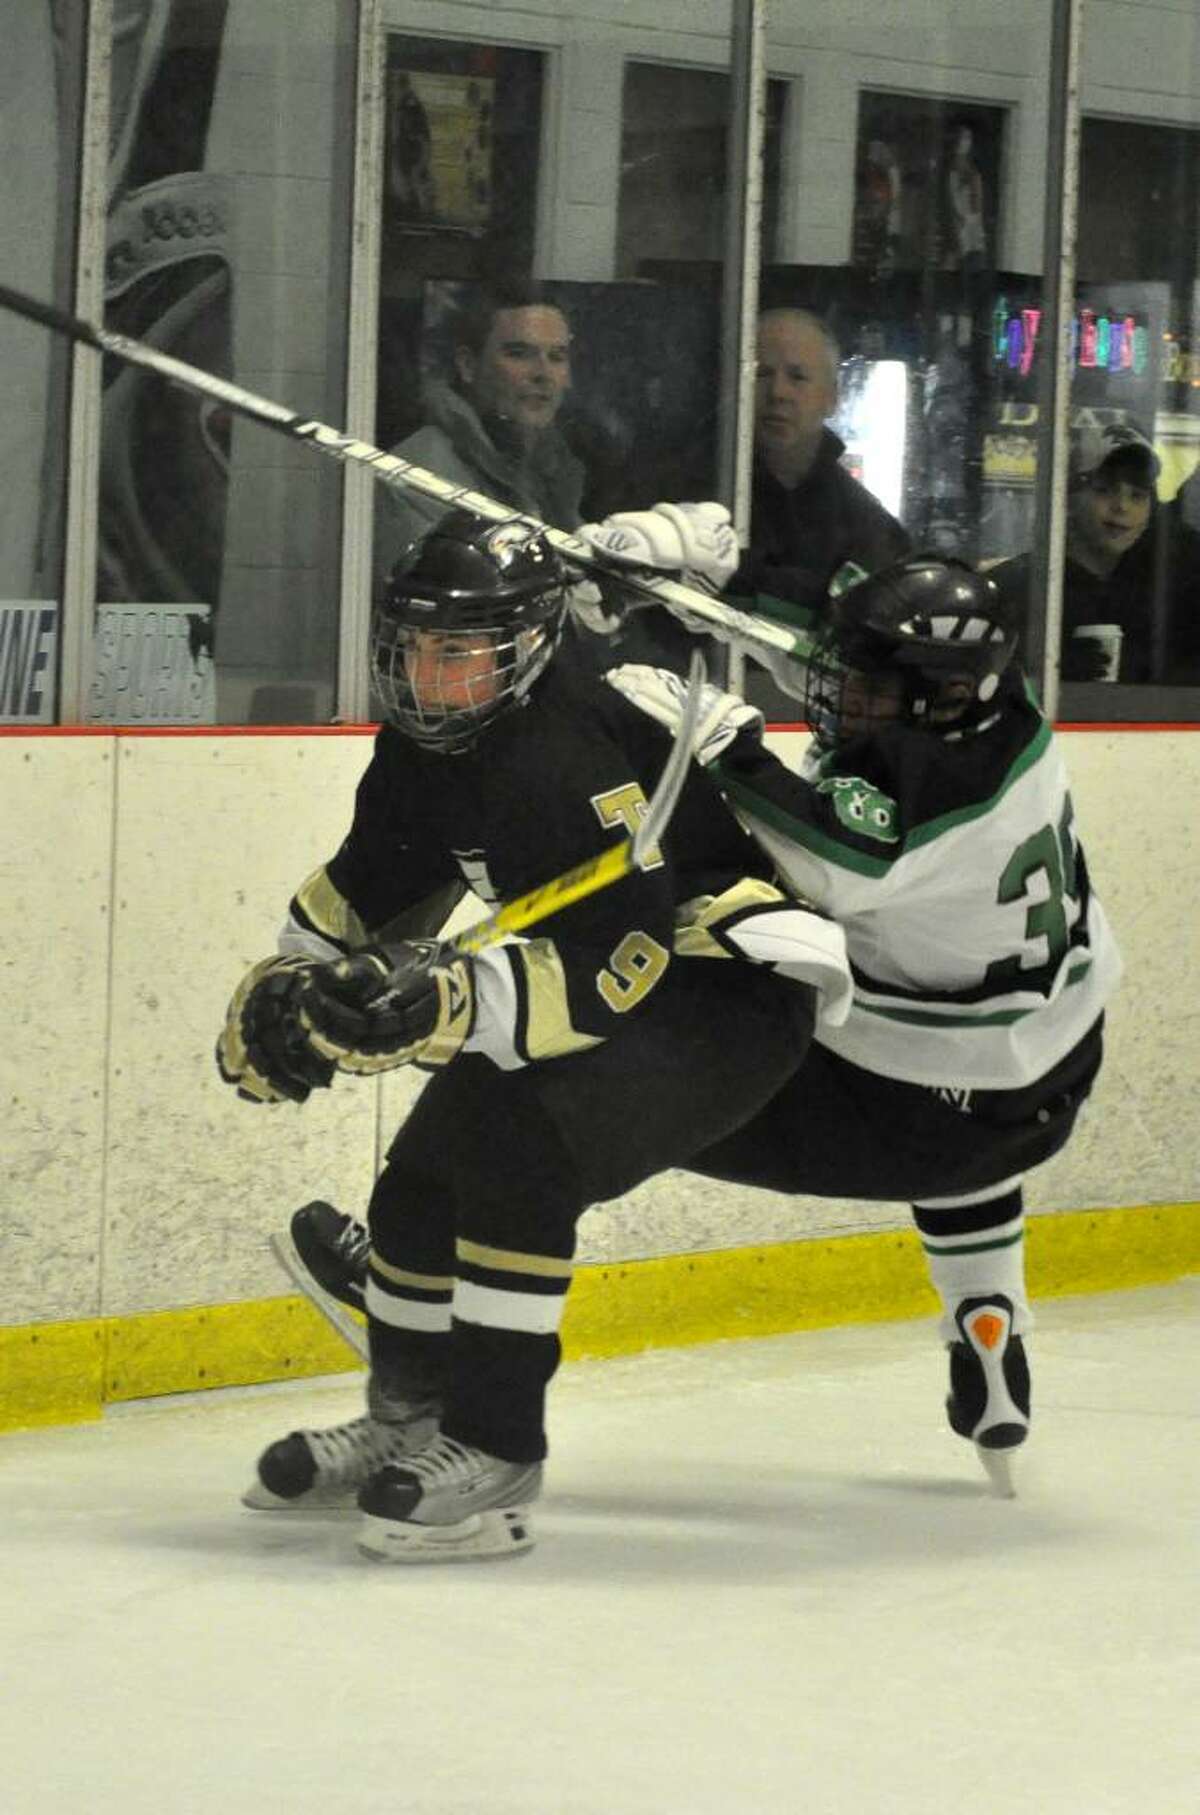 Trumbull High School's AJ DiMasi collides with Norwalk/McMahon's Joe Cox during the boys ice hockey game at Darien Ice Rink on Monday, Jan. 11, 2010.